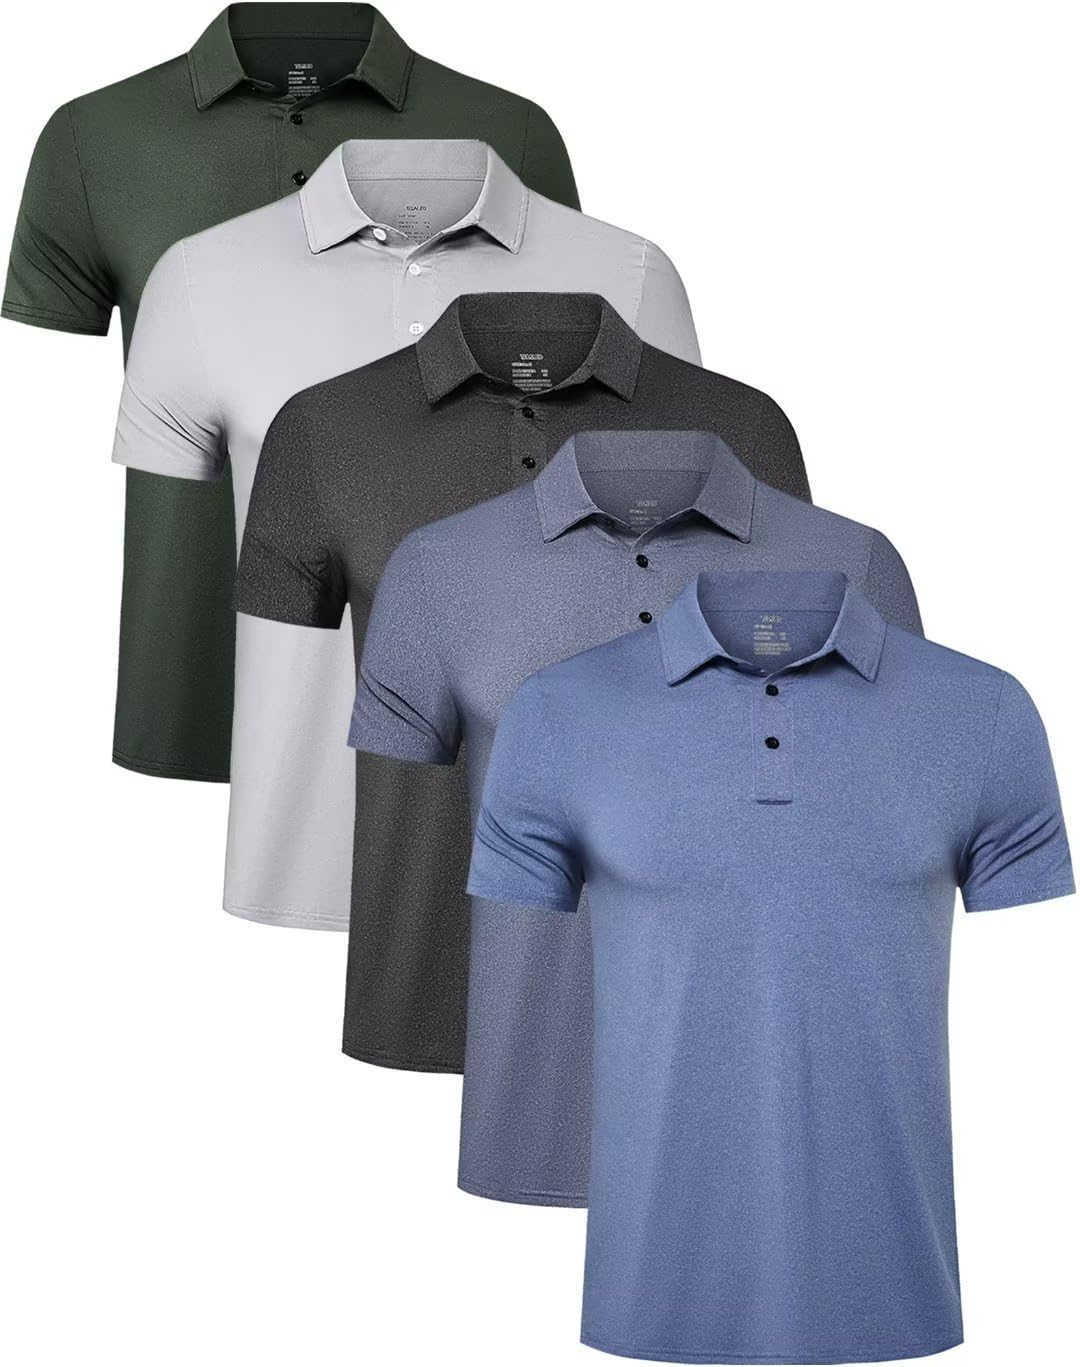 TELALEO 5 Pack Mens Polo Shirts Quick Dry Short Sleeve Golf T Shirt Performance Moisture Wicking Casual Workout SetB M